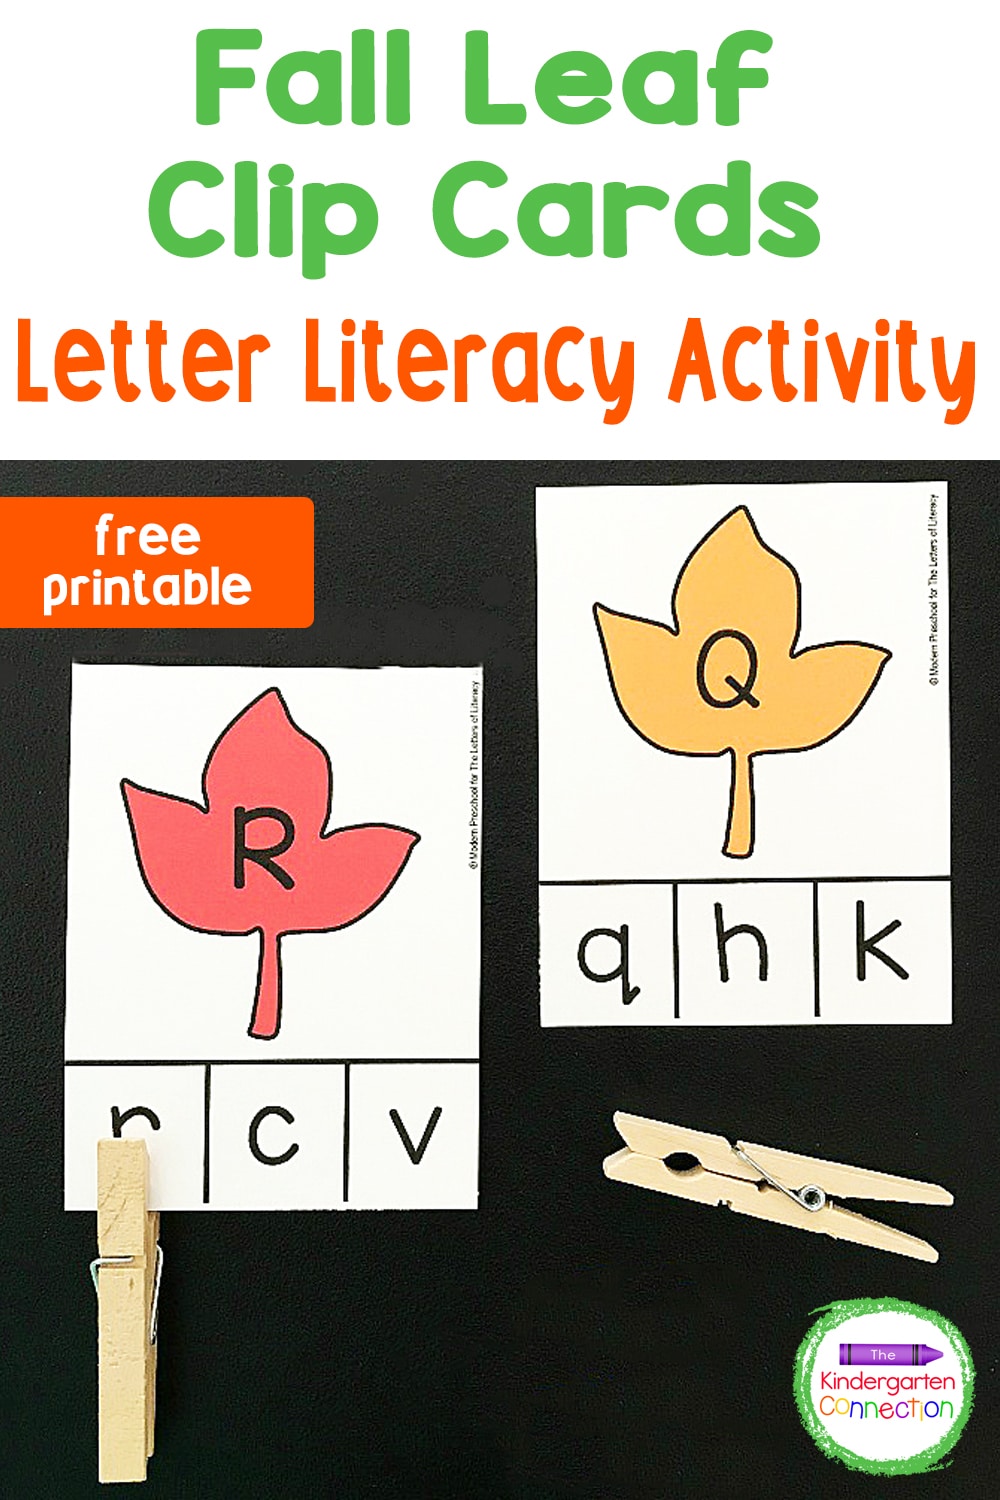 There are so many ways to learn with fall leaves.  These fall leaf letter clip cards are low-prep and encourage fine motor skills.